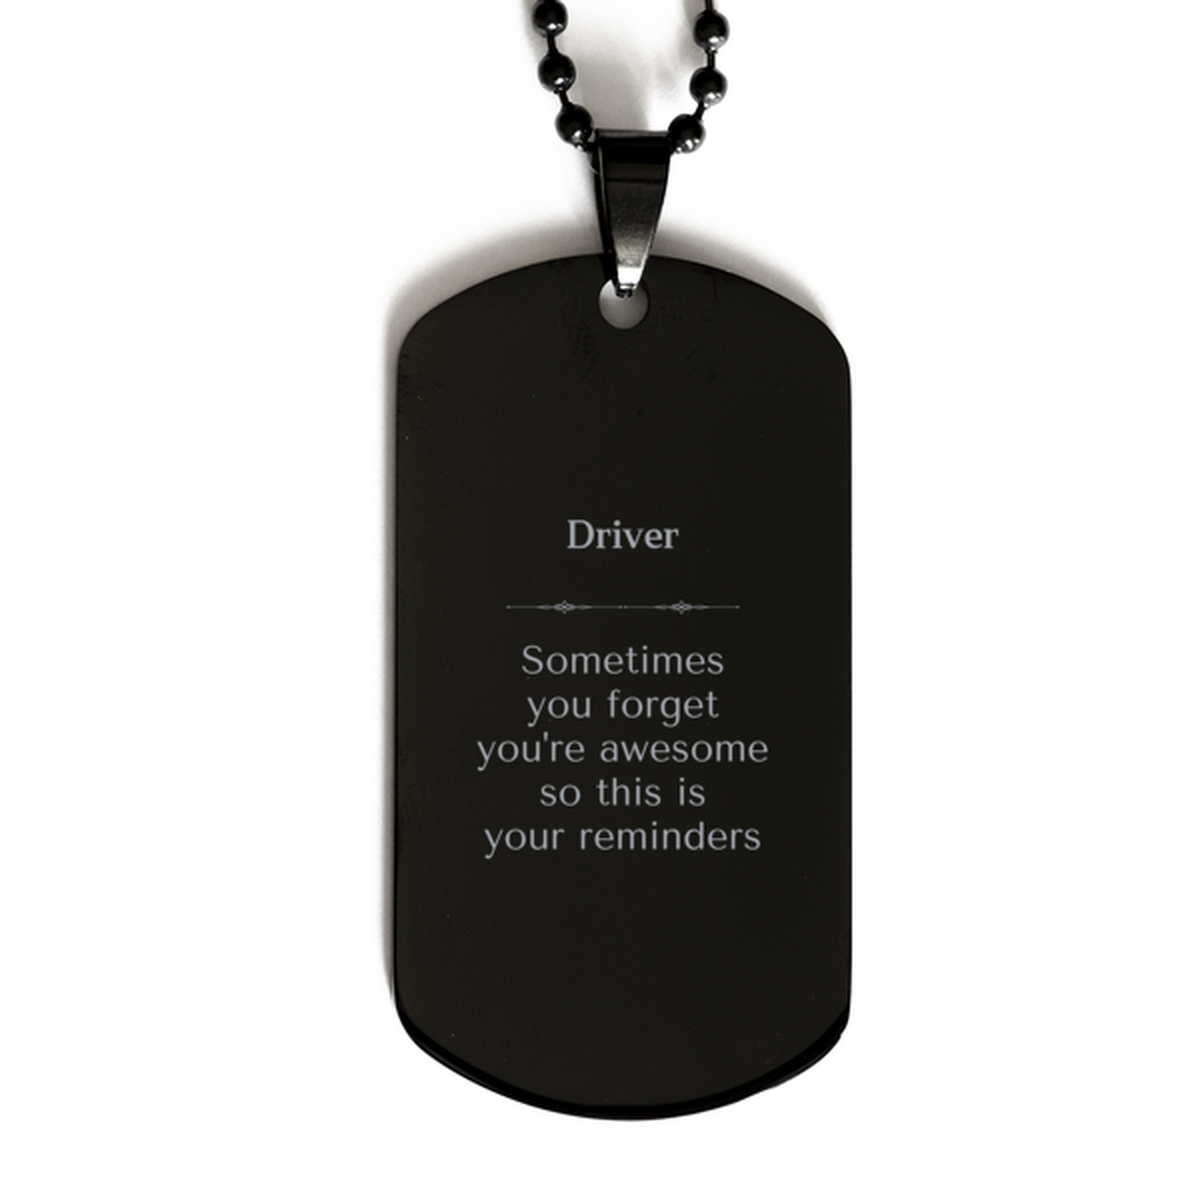 Sentimental Driver Black Dog Tag, Driver Sometimes you forget you're awesome so this is your reminders, Graduation Christmas Birthday Gifts for Driver, Men, Women, Coworkers